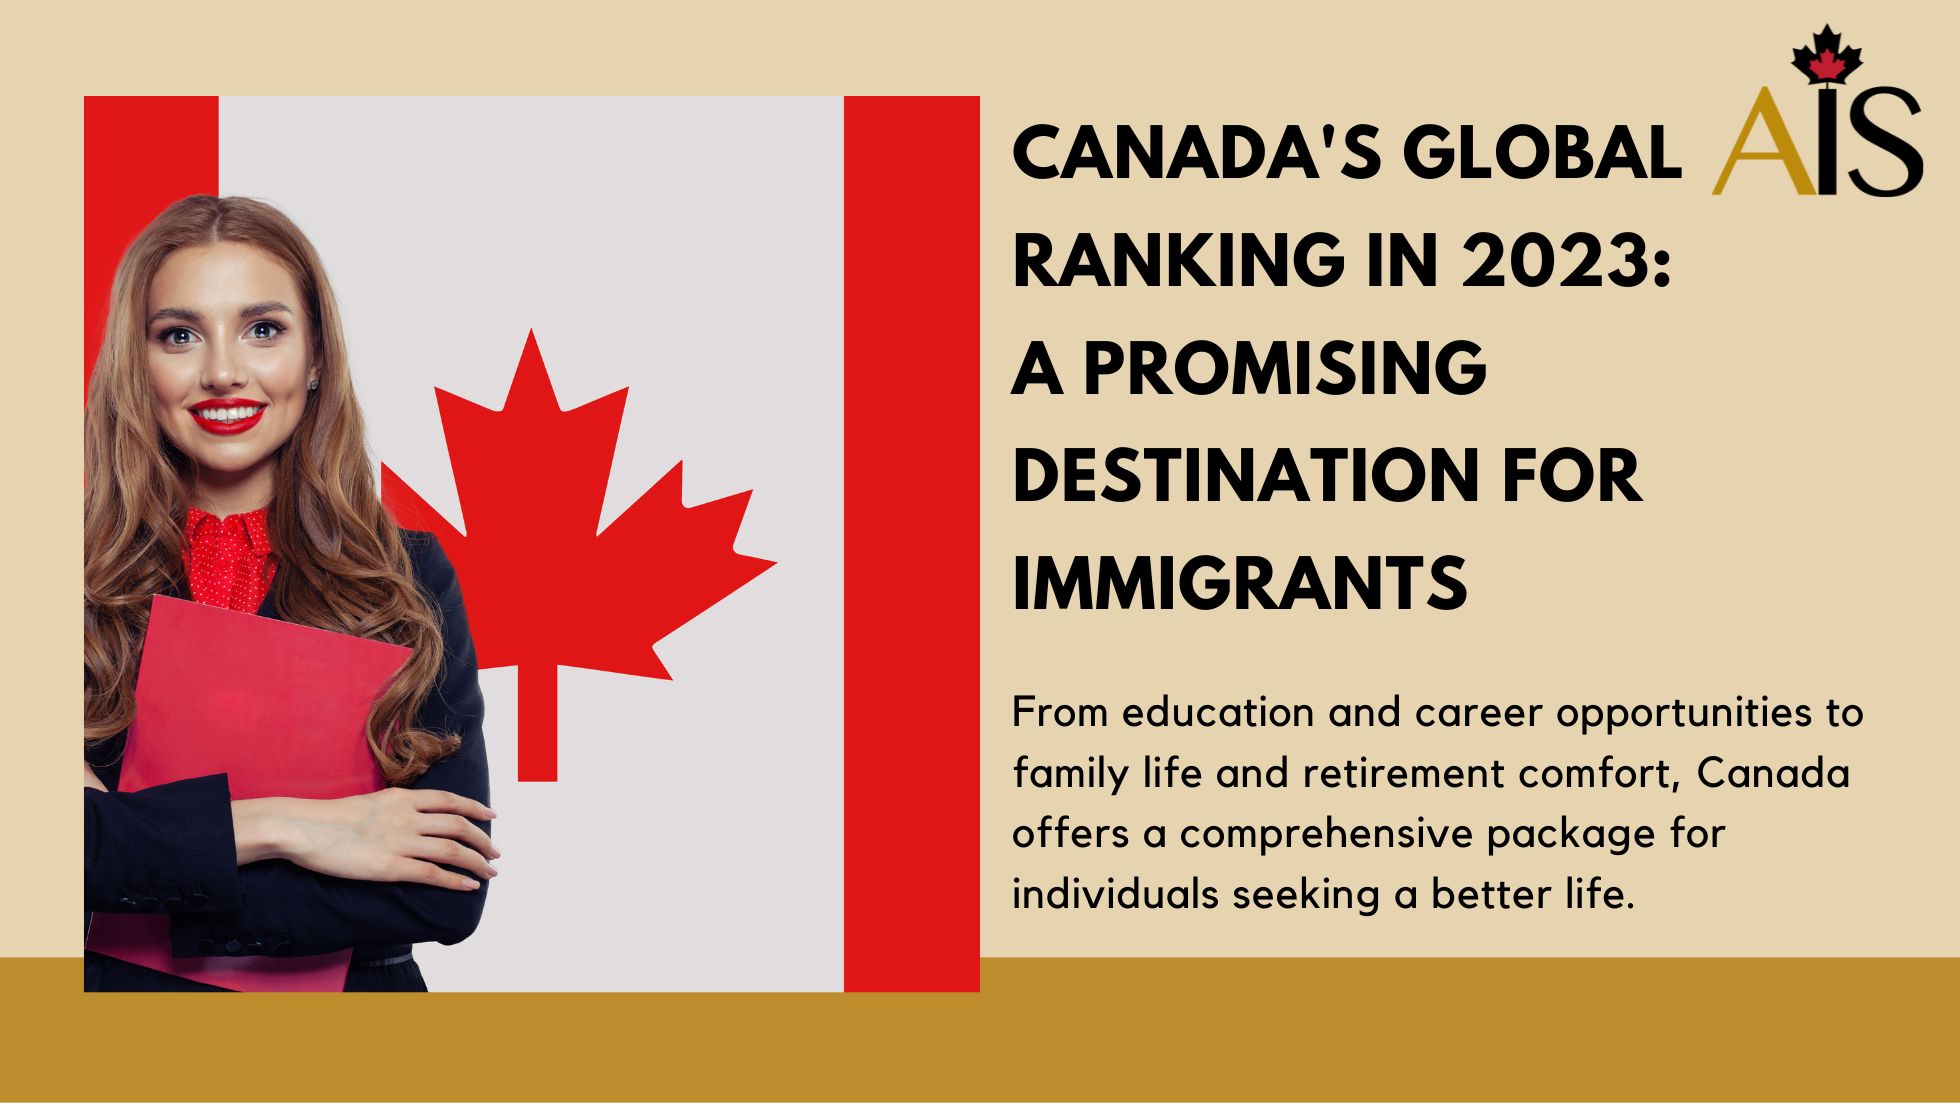 Canada’s Global Ranking in 2023: A Promising Destination for Immigrants